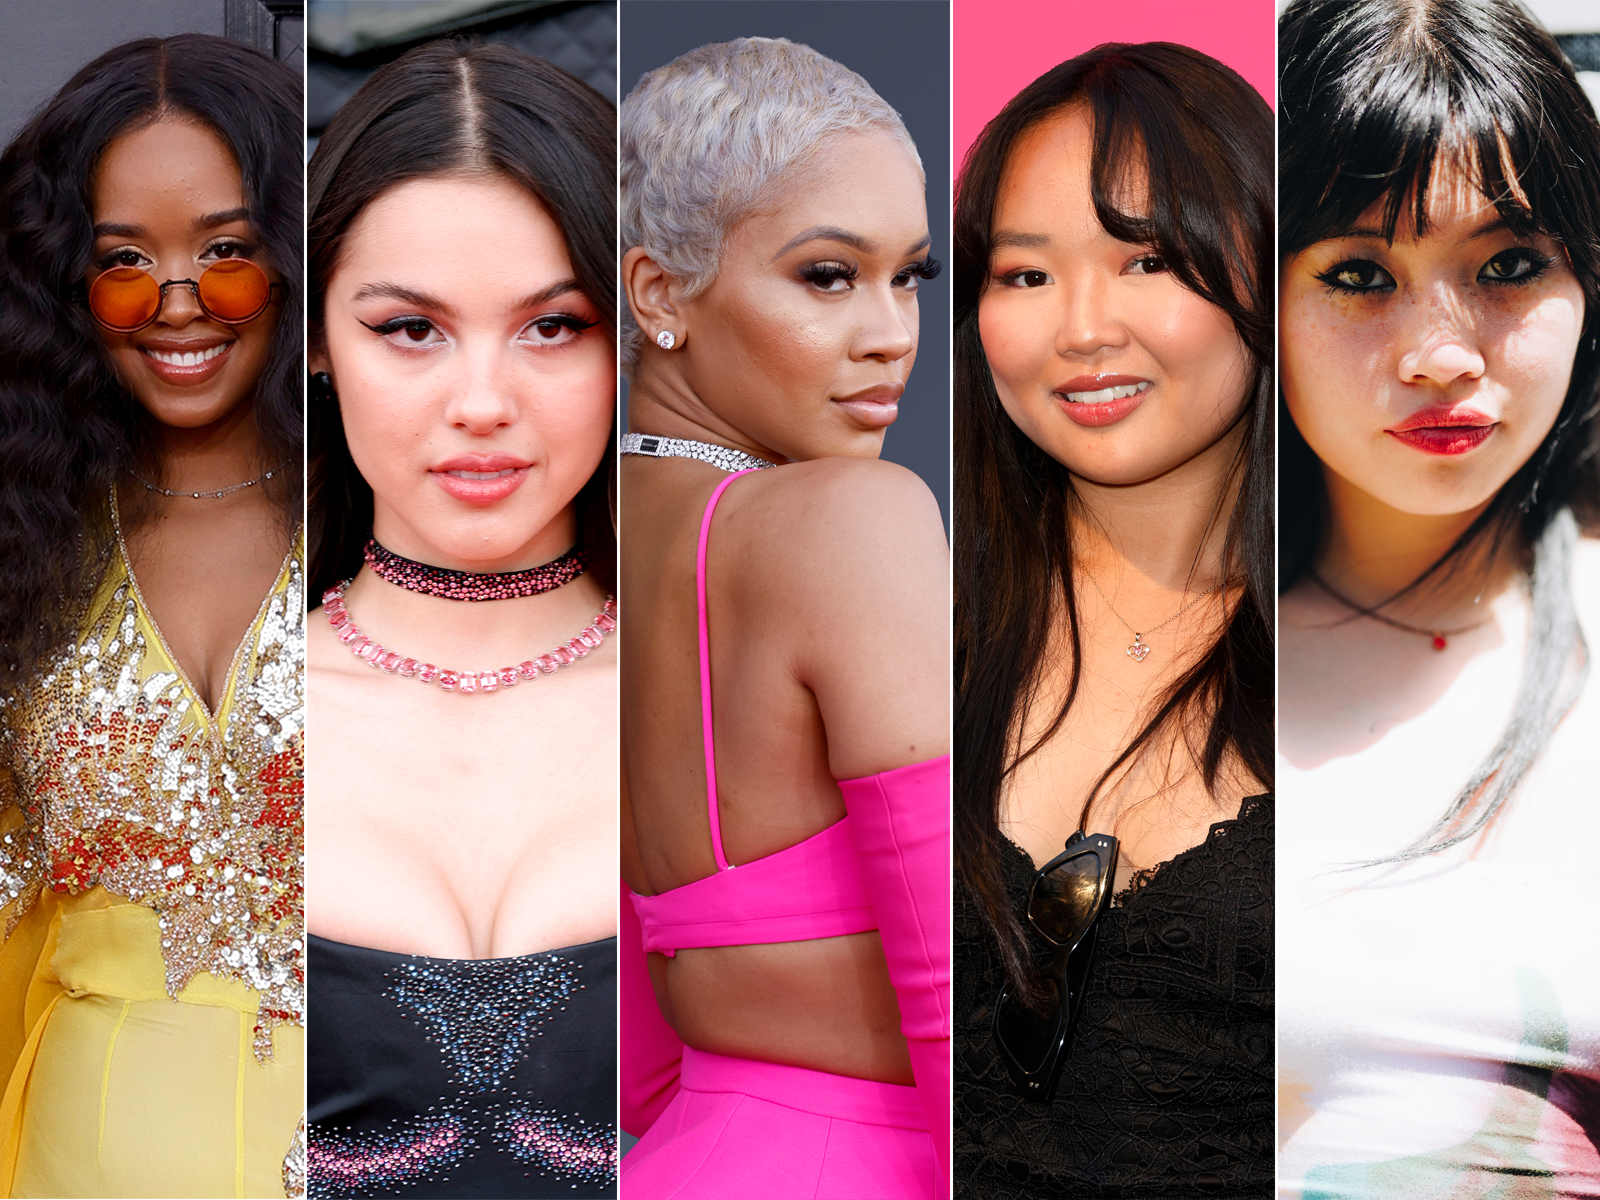 Meet Some Female Singers of Asian Heritage Who are Rocking the